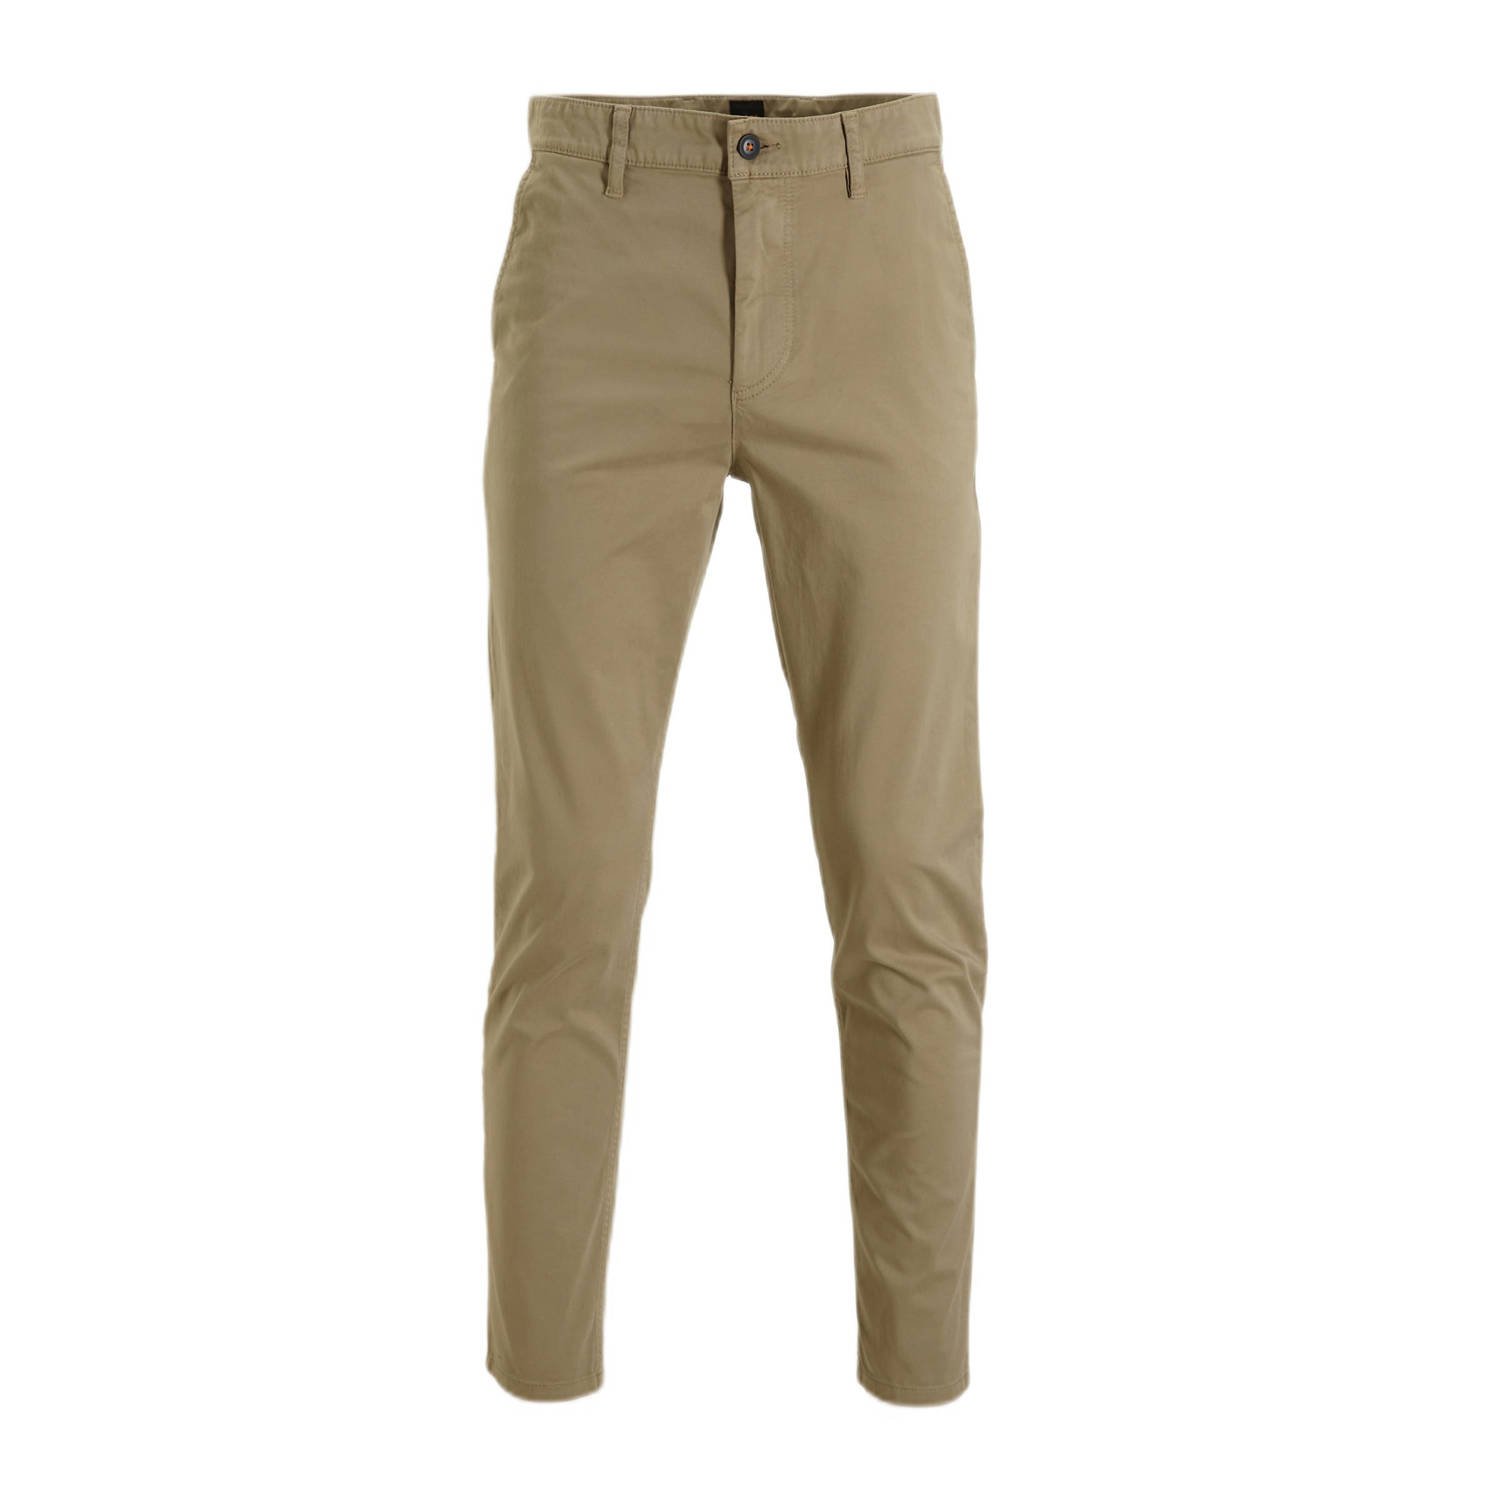 BOSS tapered fit chino light pastel brown